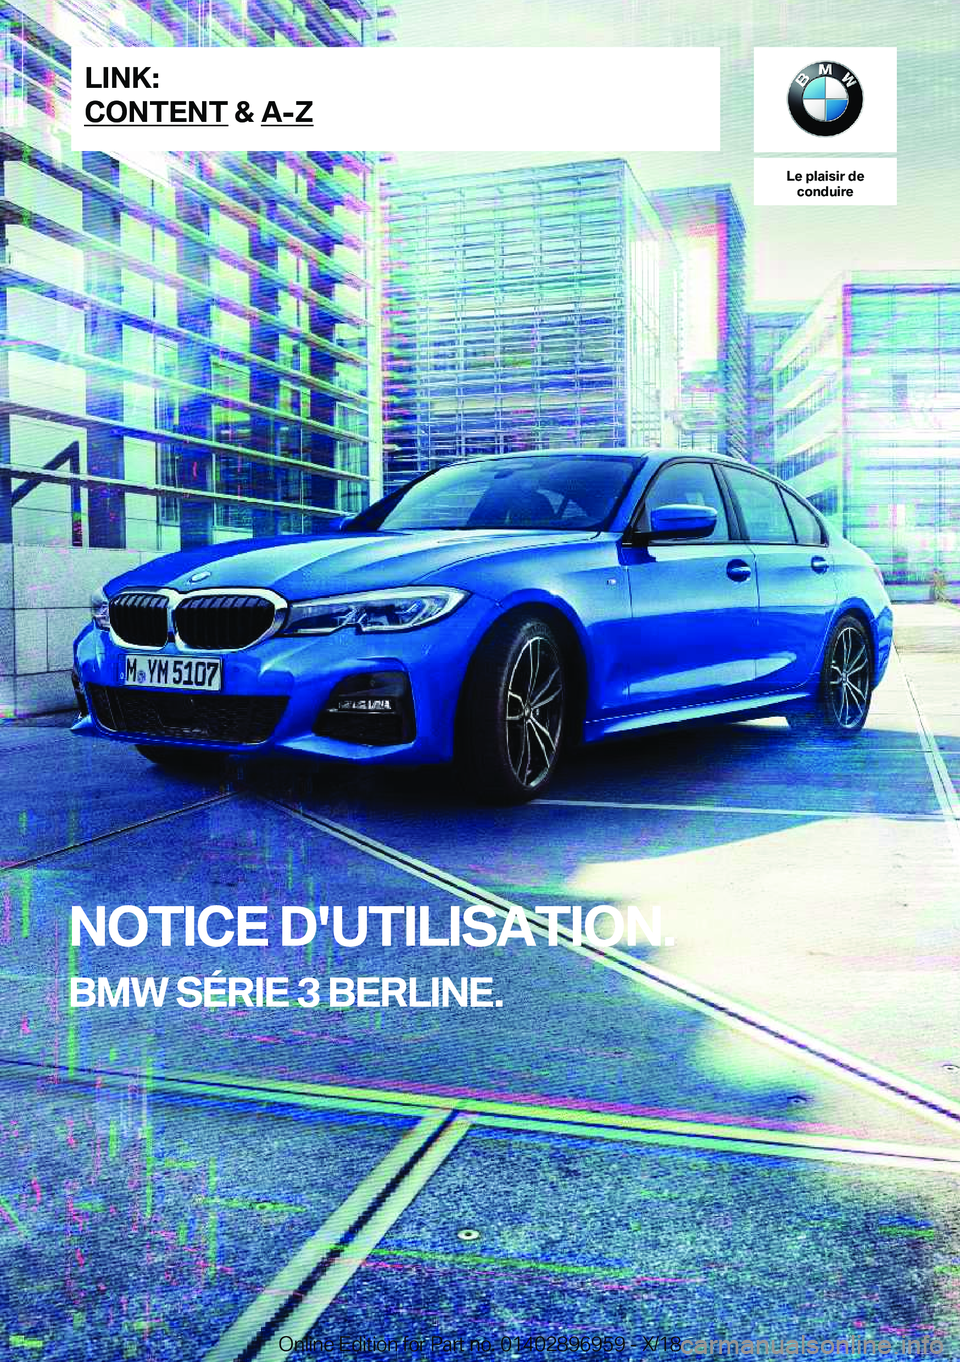 BMW 3 SERIES 2019  Notices Demploi (in French) �L�e��p�l�a�i�s�i�r��d�e�c�o�n�d�u�i�r�e
�N�O�T�I�C�E��D�'�U�T�I�L�I�S�A�T�I�O�N�.
�B�M�W��S�